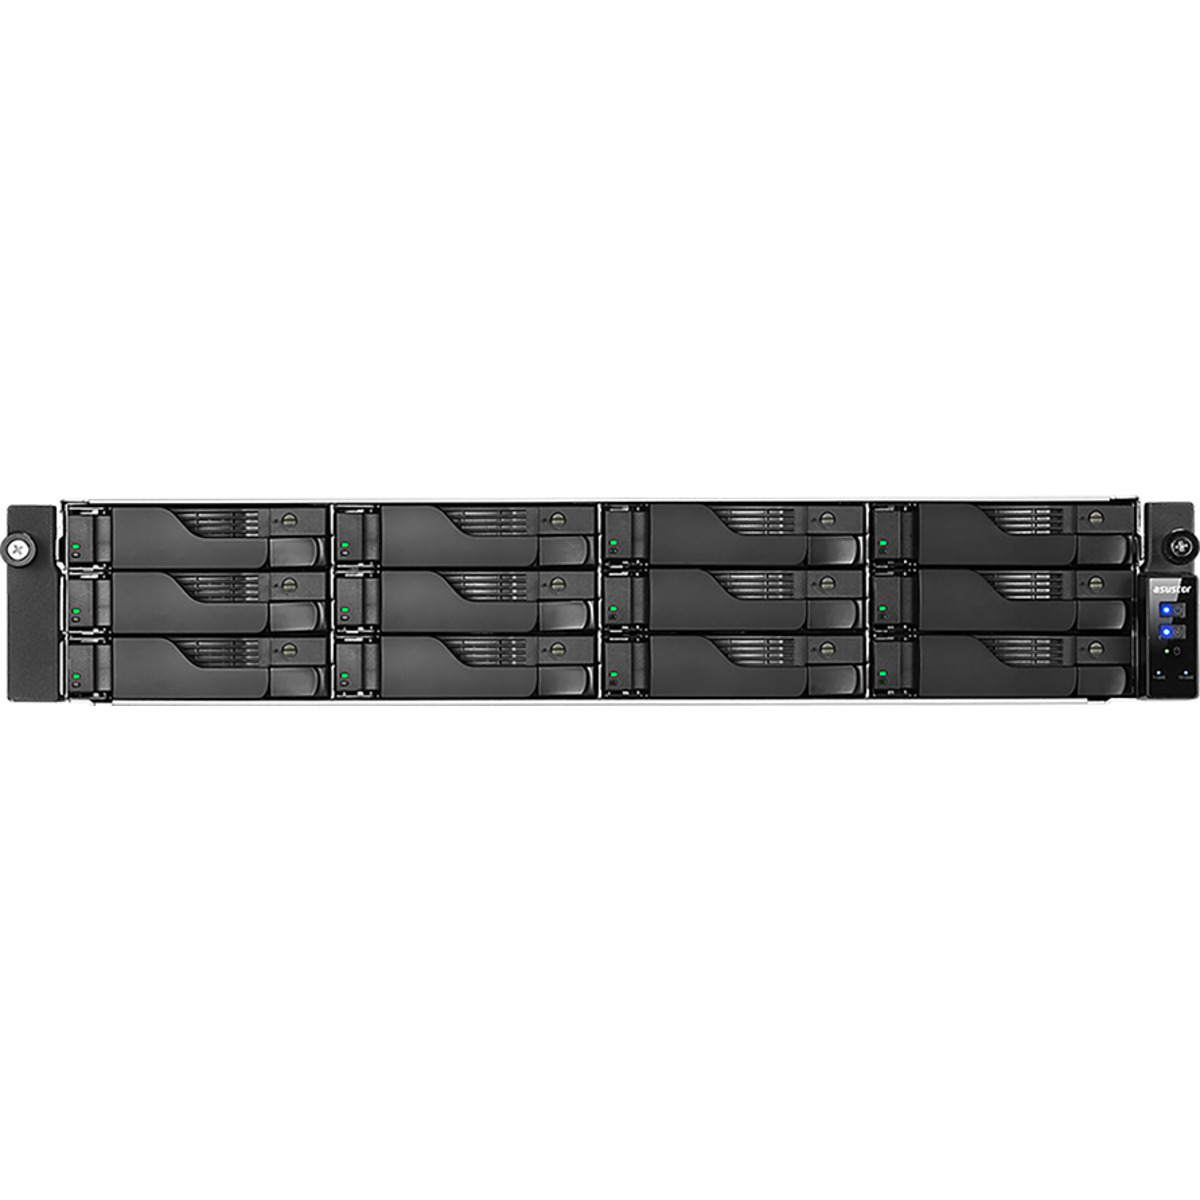 ASUSTOR LOCKERSTOR 12RD AS6512RD 72tb 12-Bay RackMount Multimedia / Power User / Business NAS - Network Attached Storage Device 9x8tb Toshiba Enterprise Capacity MG08ADA800E 3.5 7200rpm SATA 6Gb/s HDD ENTERPRISE Class Drives Installed - Burn-In Tested - FREE RAM UPGRADE LOCKERSTOR 12RD AS6512RD